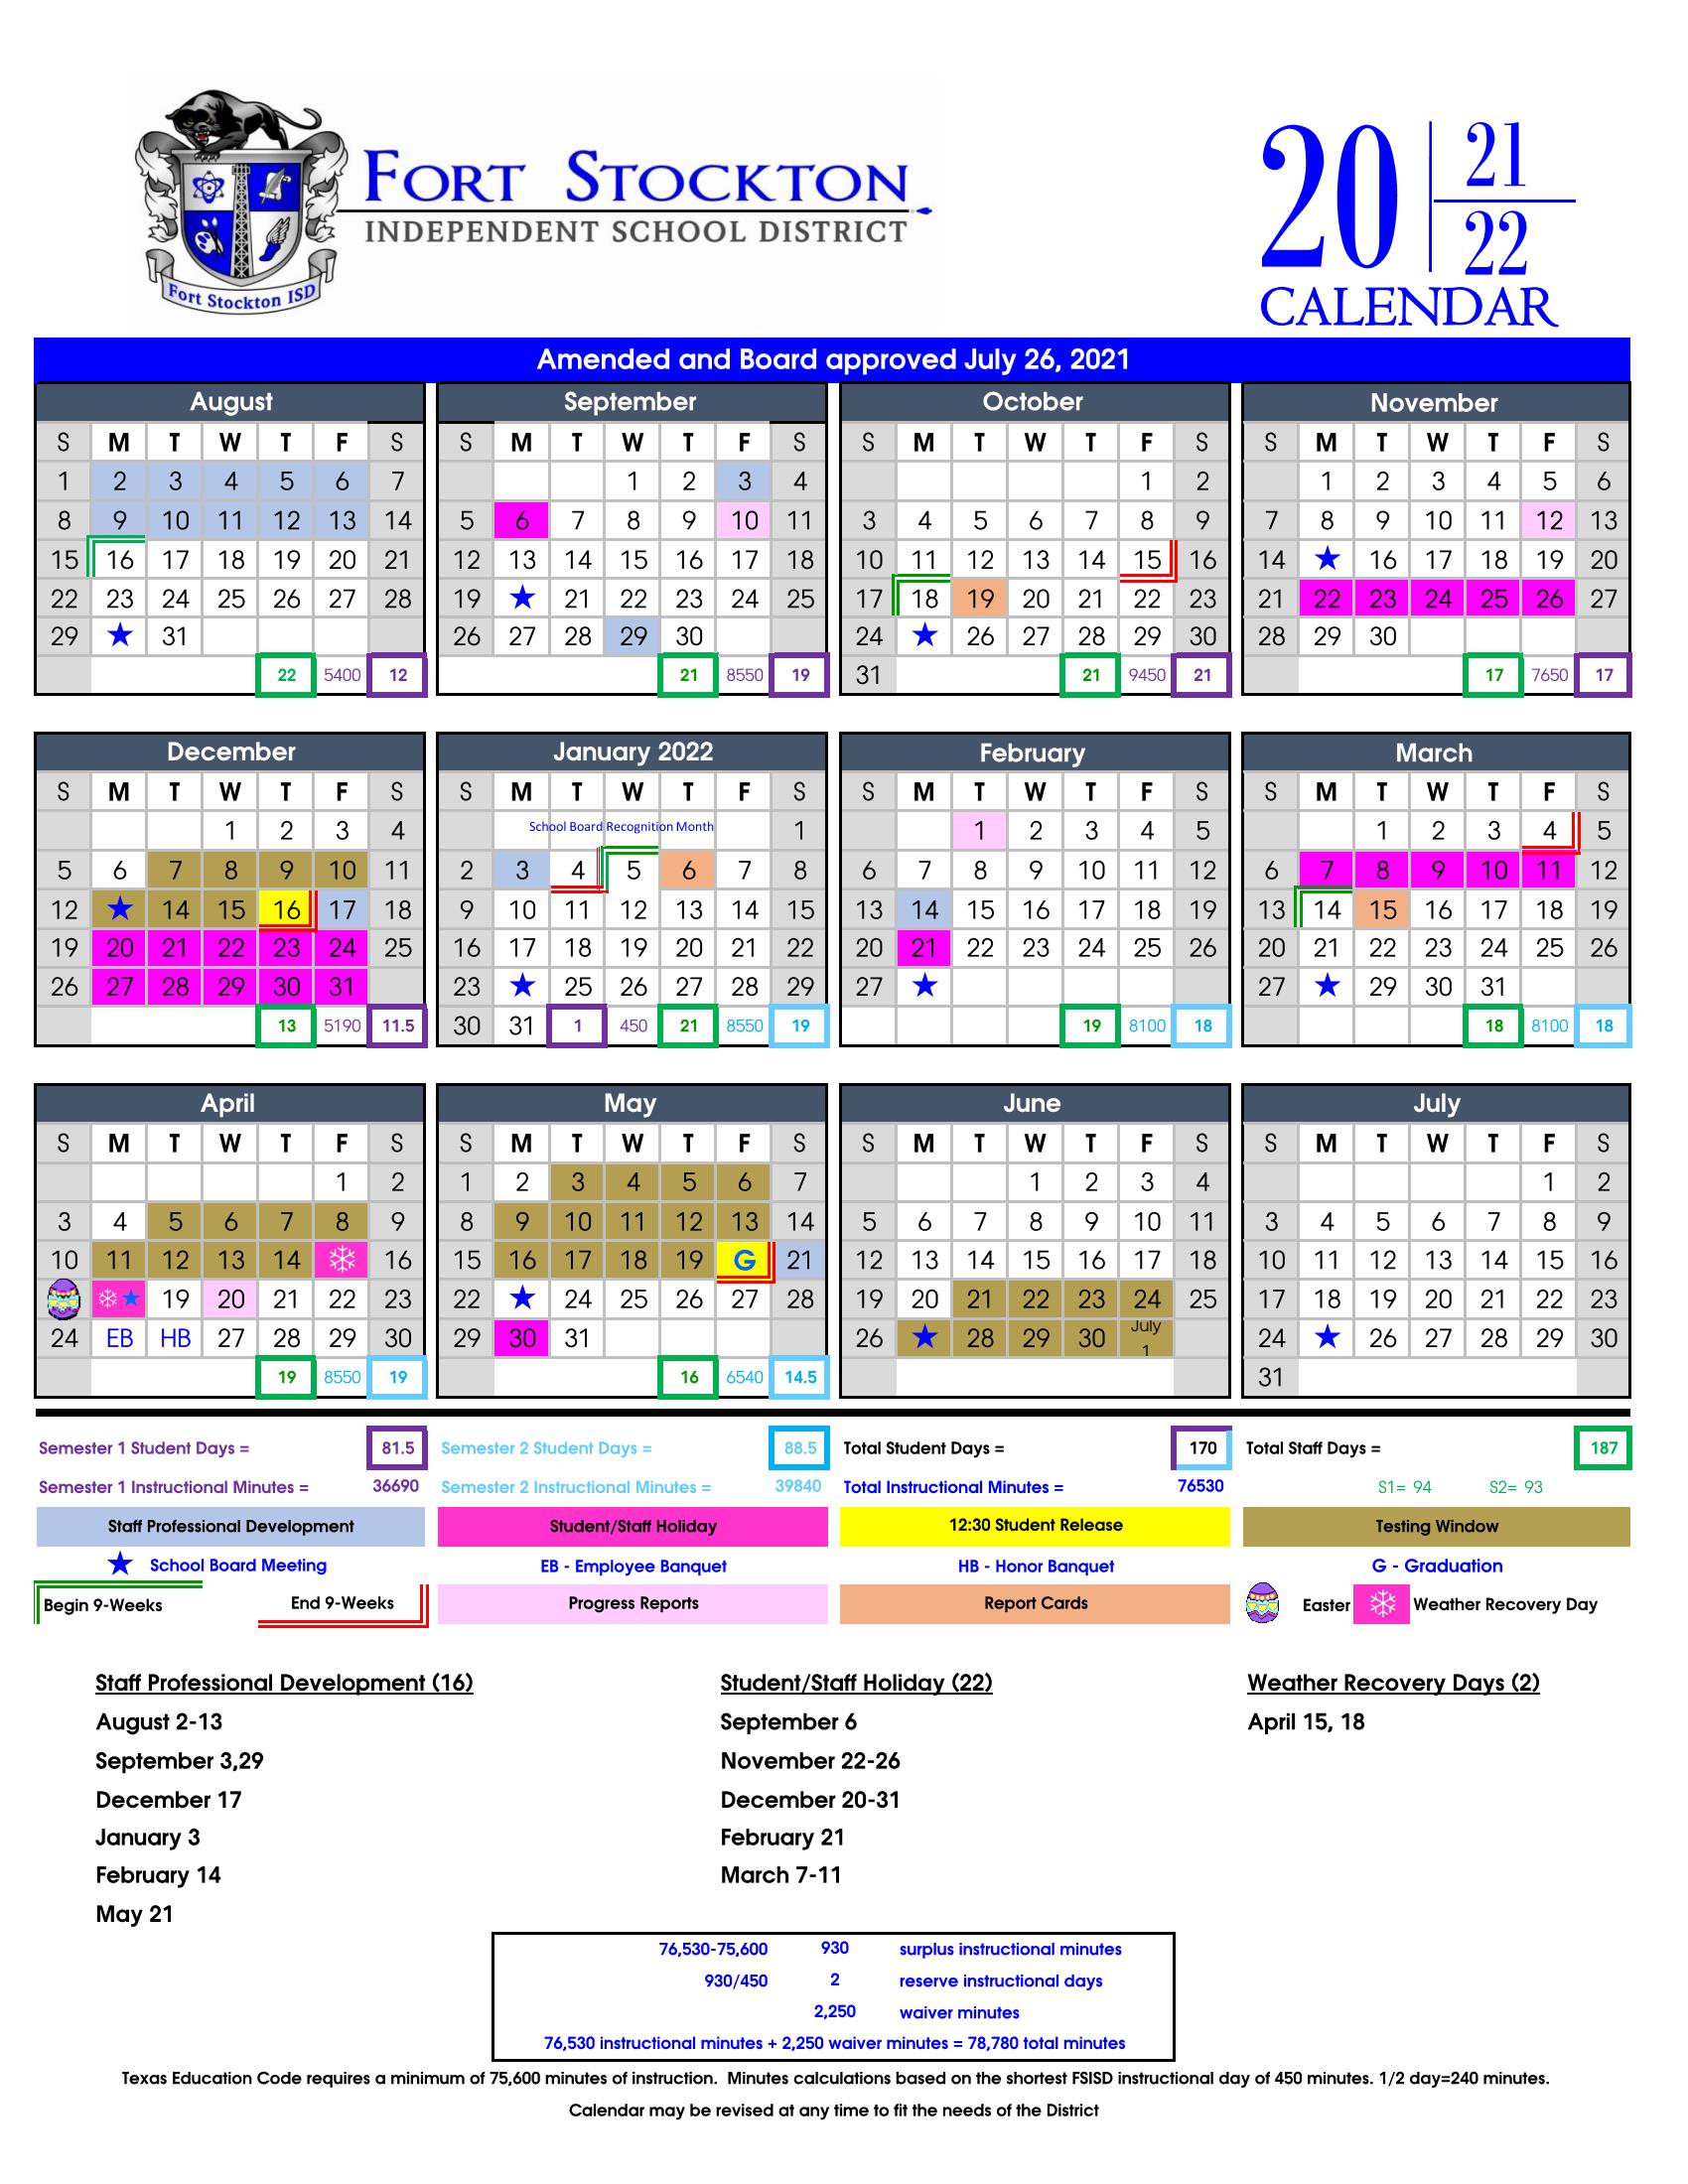 fsisd-newly-approved-calendar-for-2021-2022-school-year-free-nude